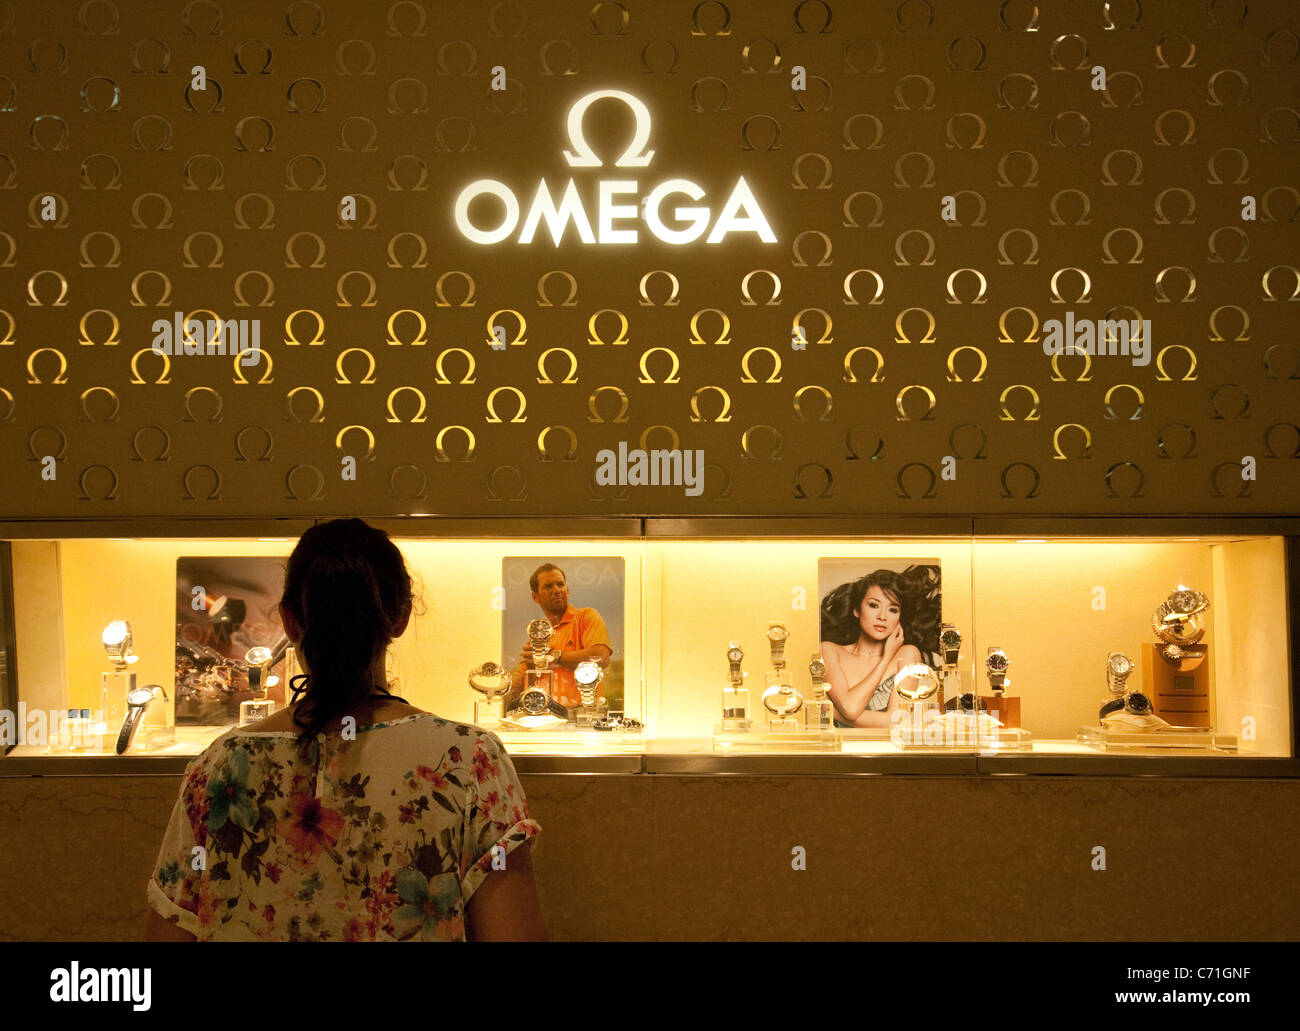 Omega Watch Watches Banque d'image et 